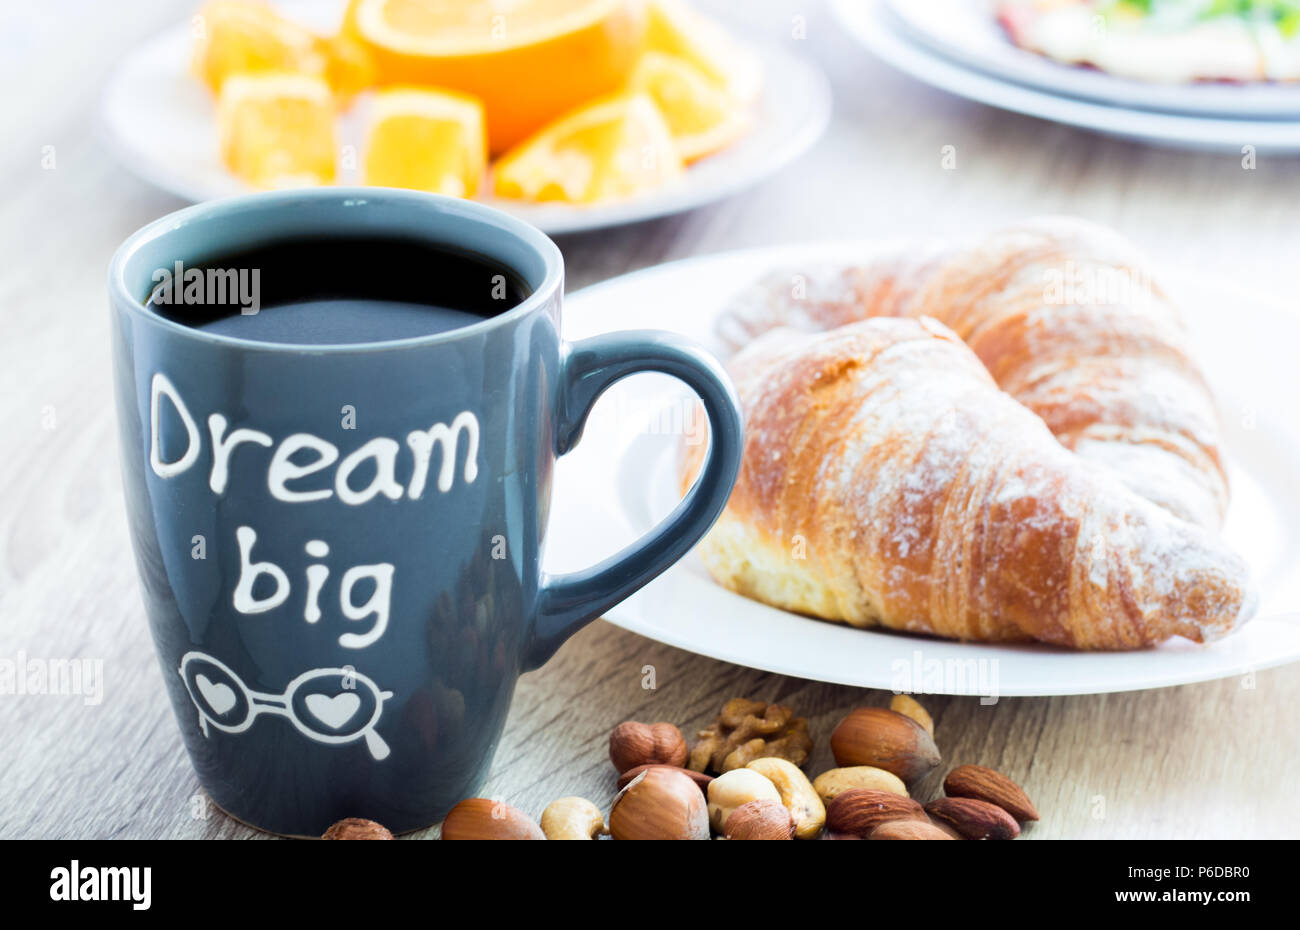 Dream big. Good morning breakfast. Mug of coffee with croissants, nuts and fresh sliced oranges Stock Photo